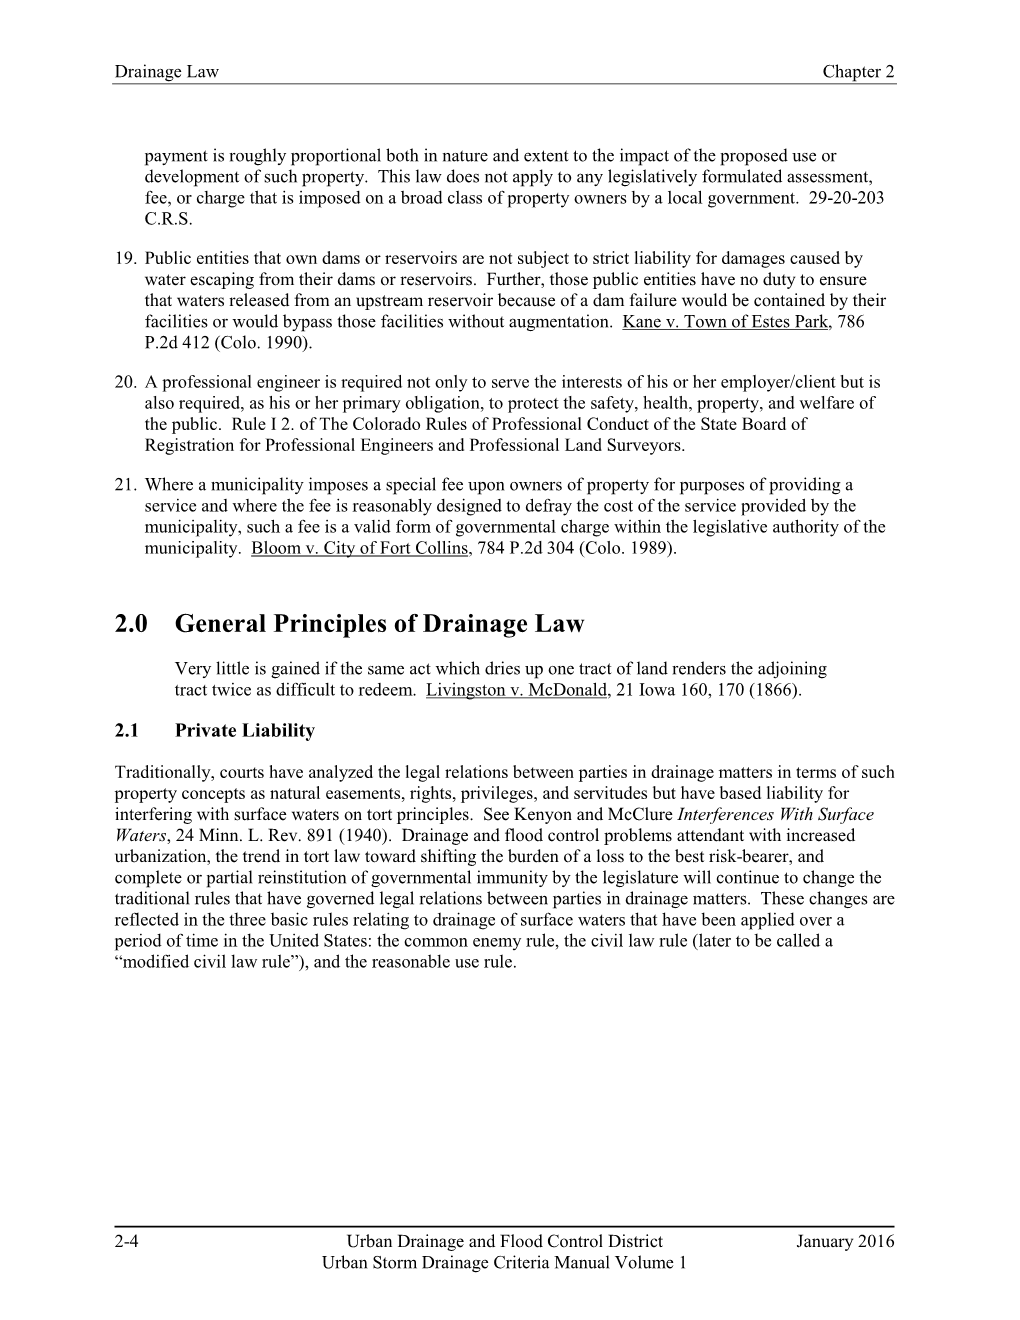 2.0 General Principles of Drainage Law